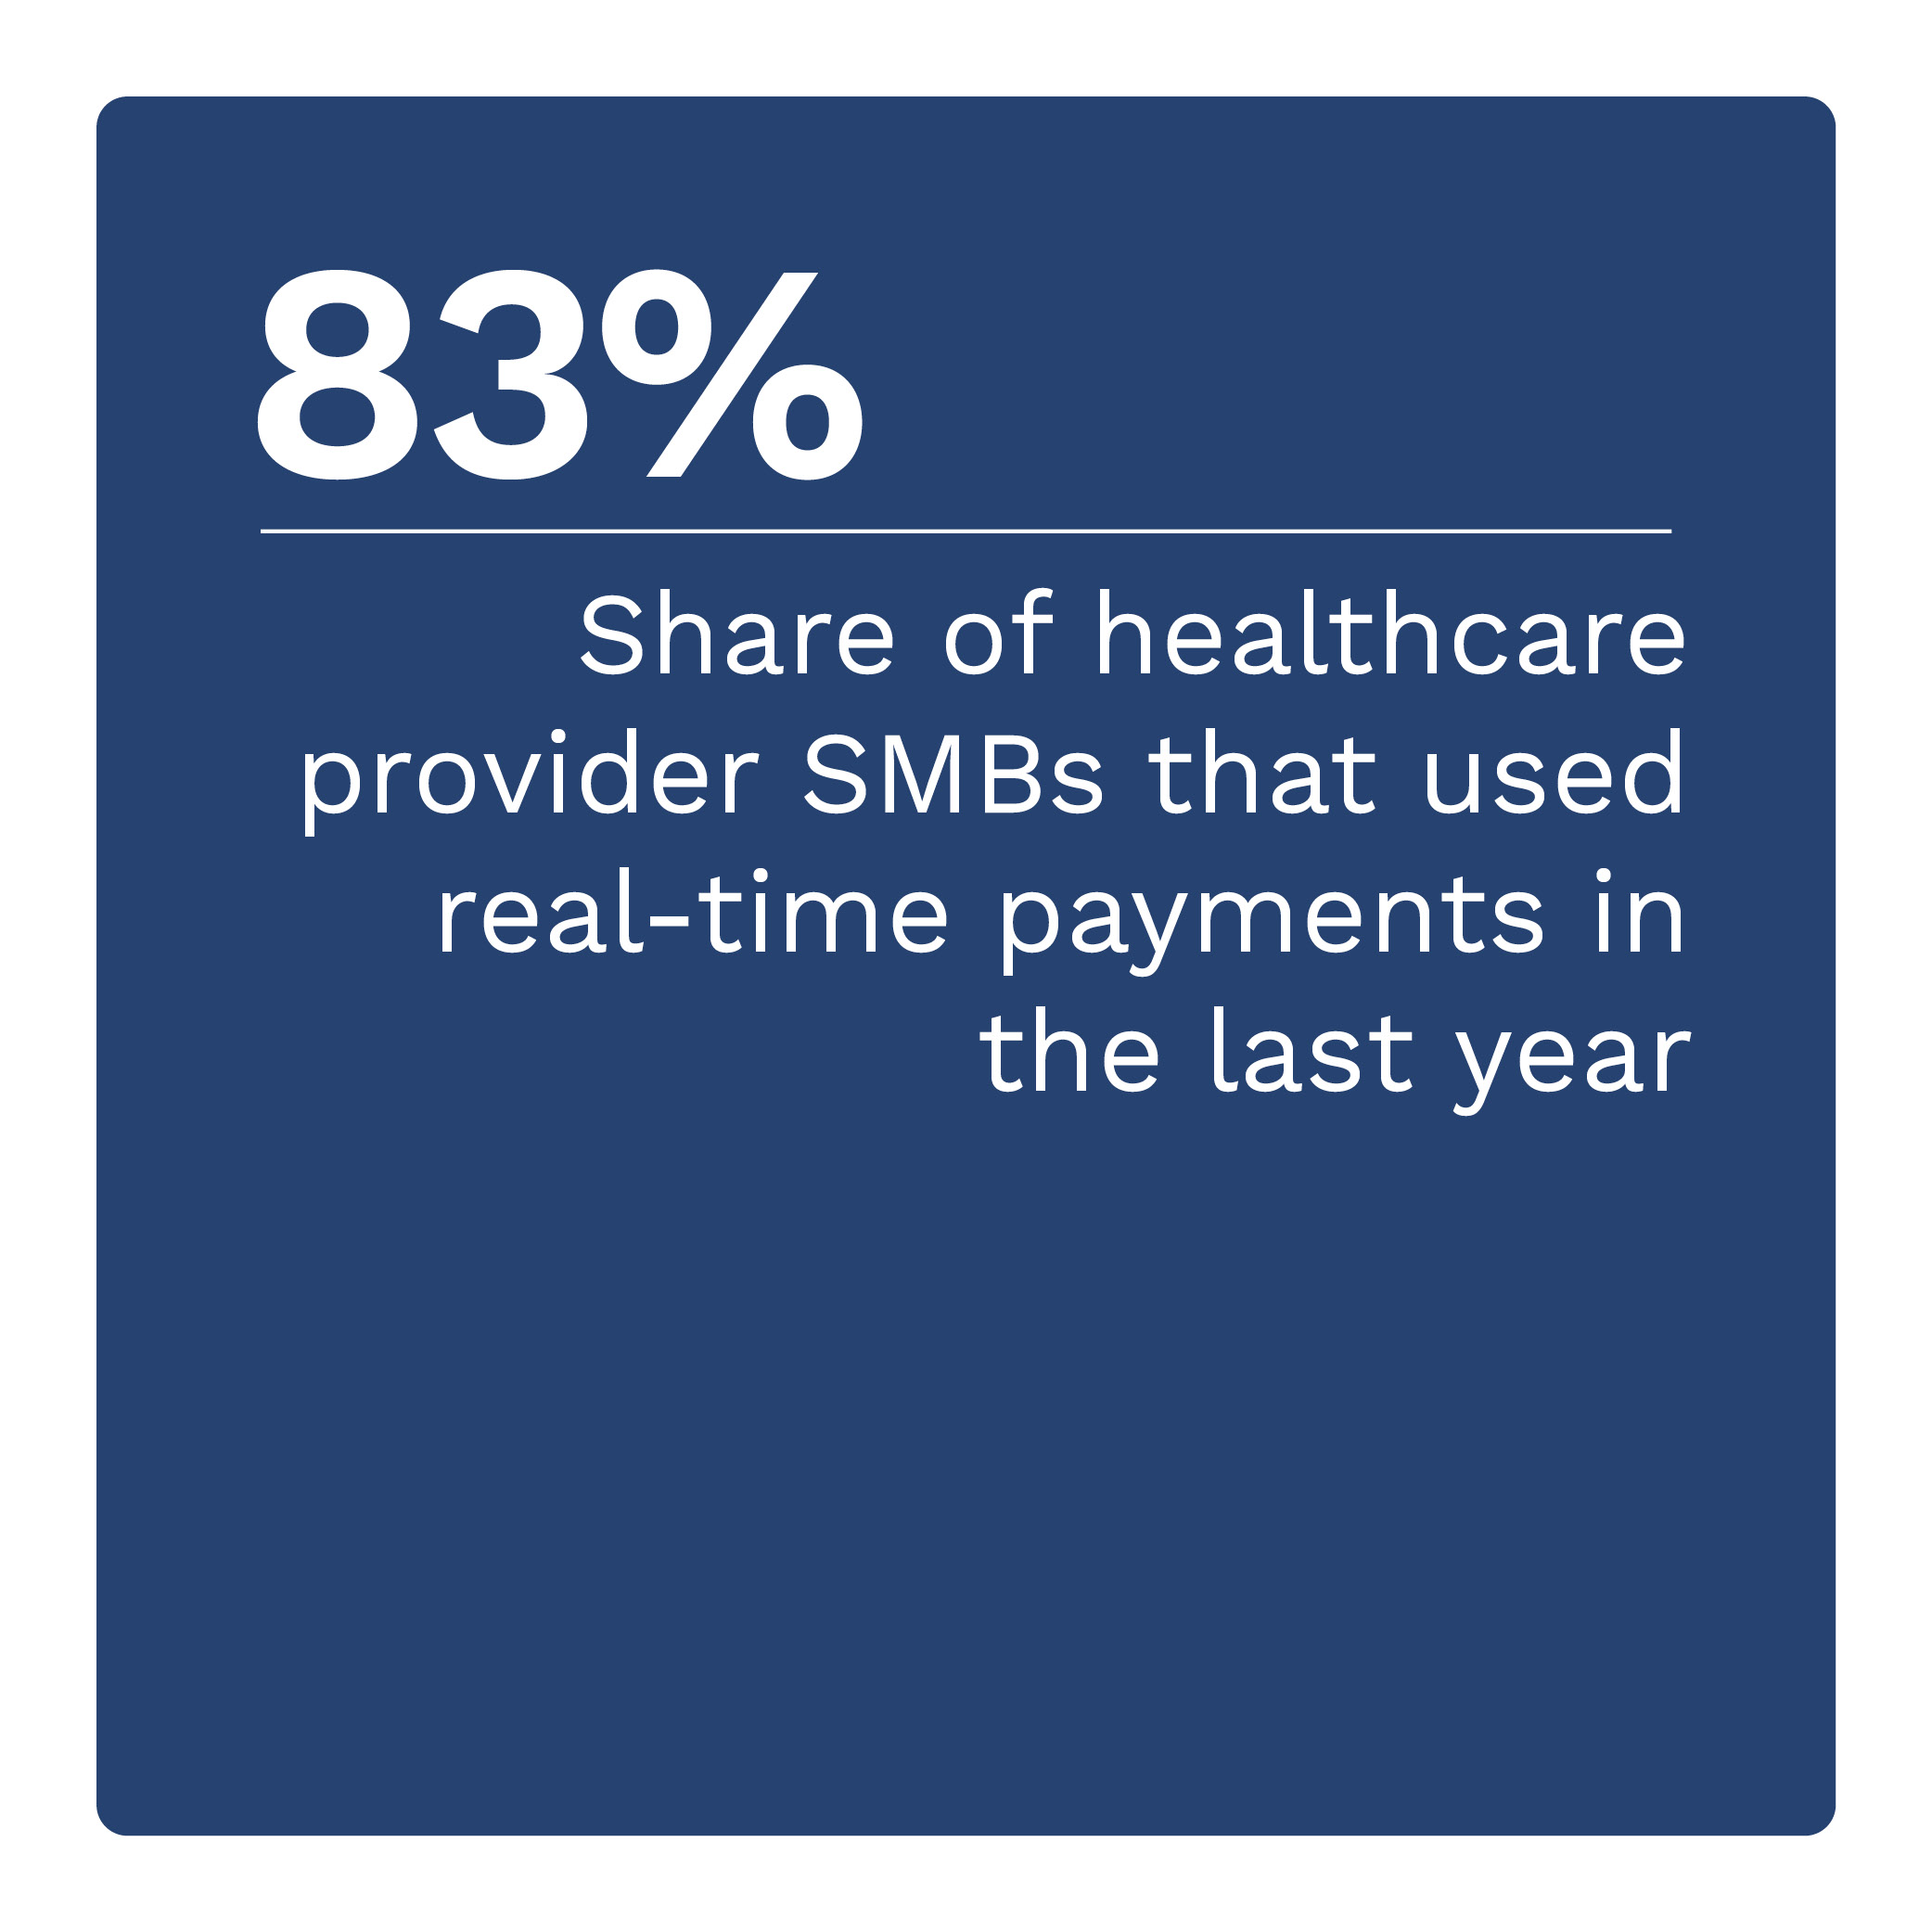 83%: Share of healthcare provider SMBs that used real-time payments in the last year